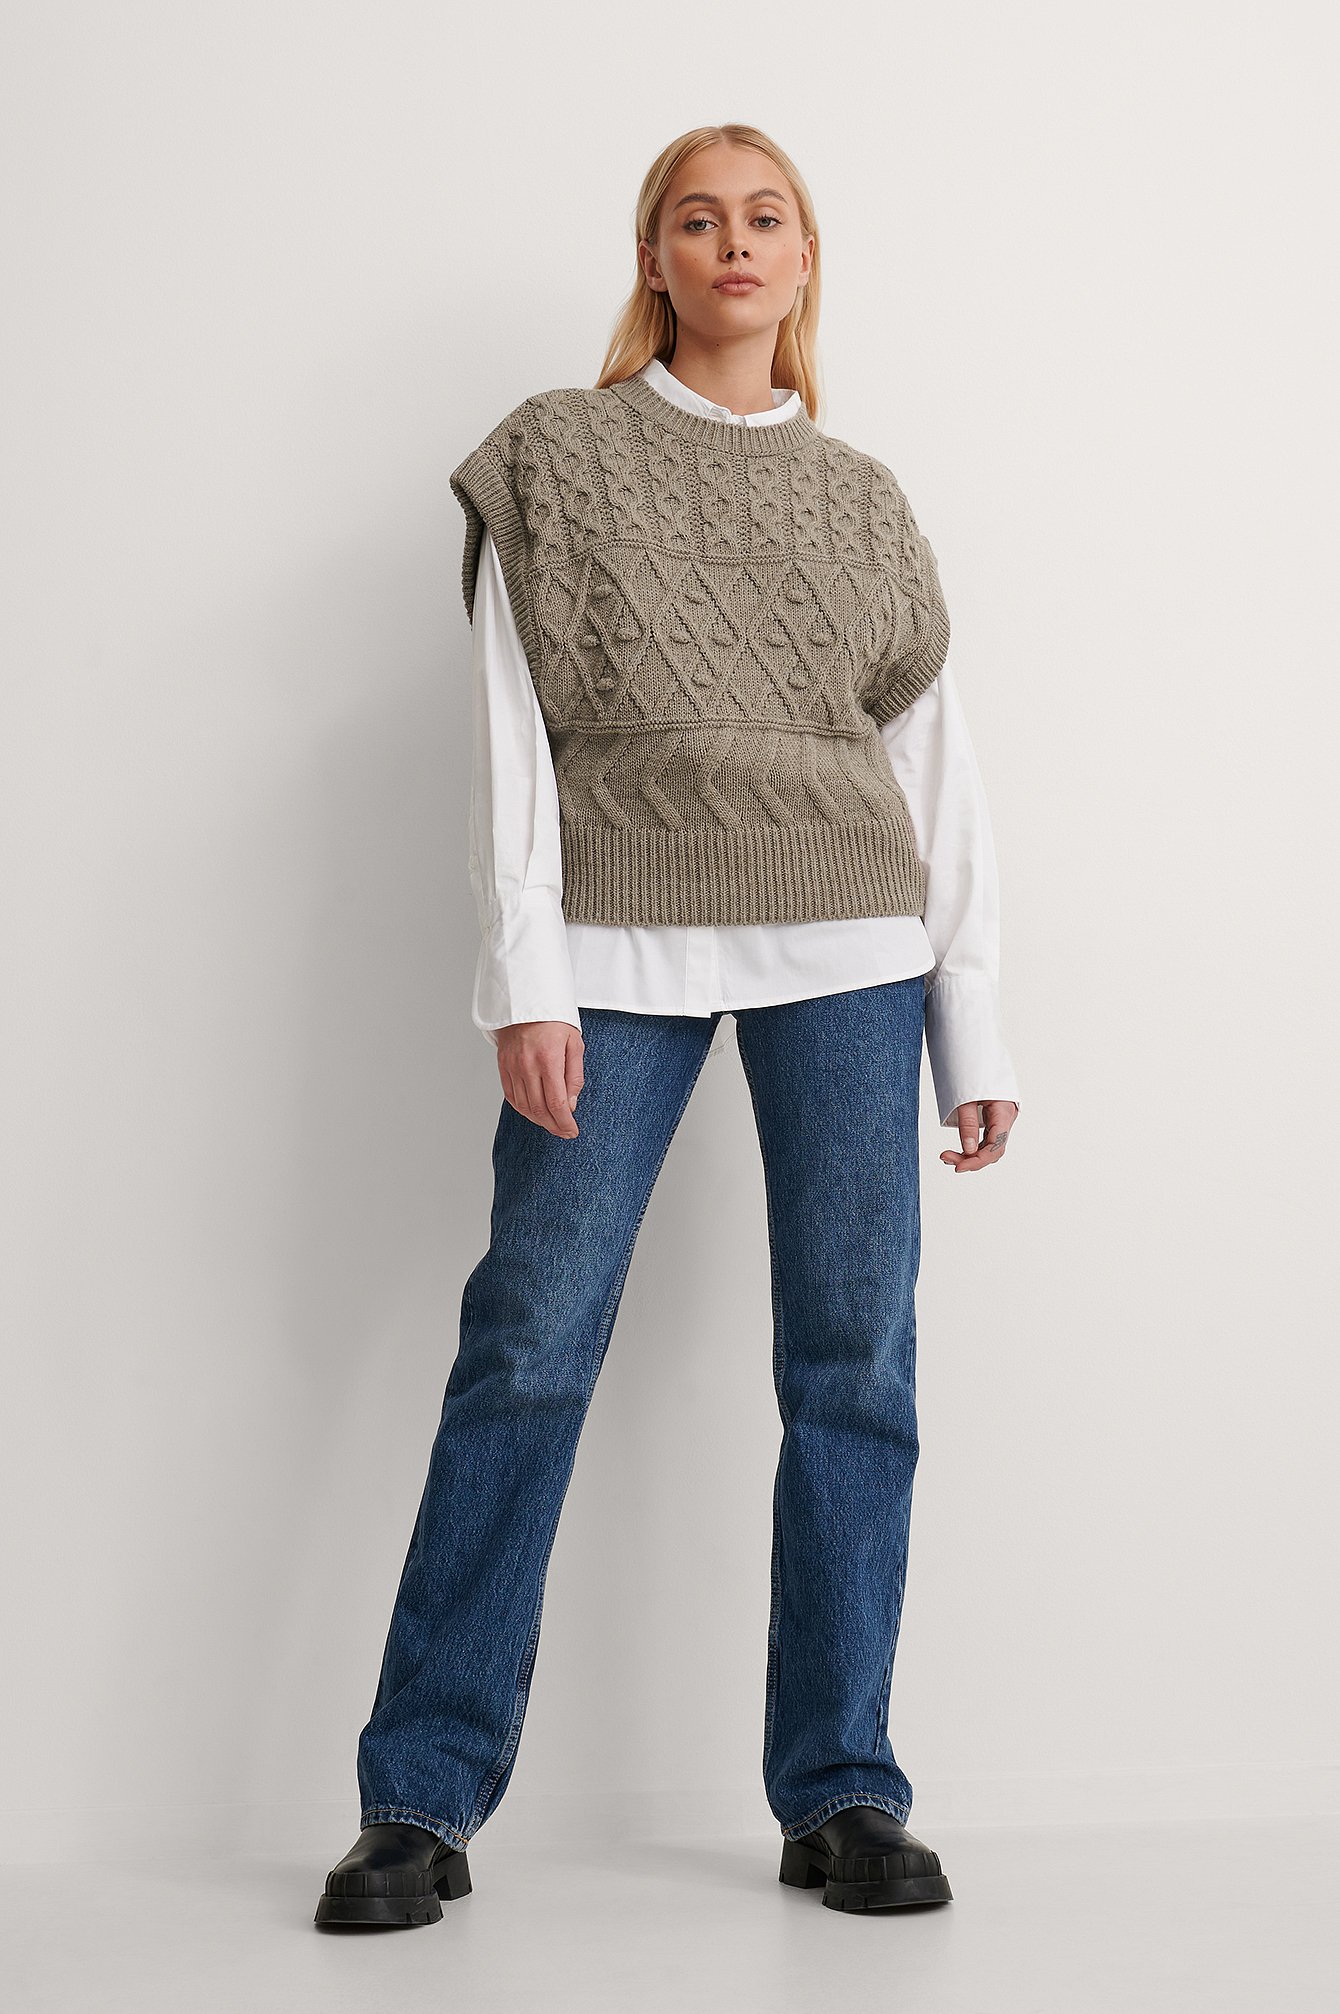 Sleeveless Knit Sweater Outfit.